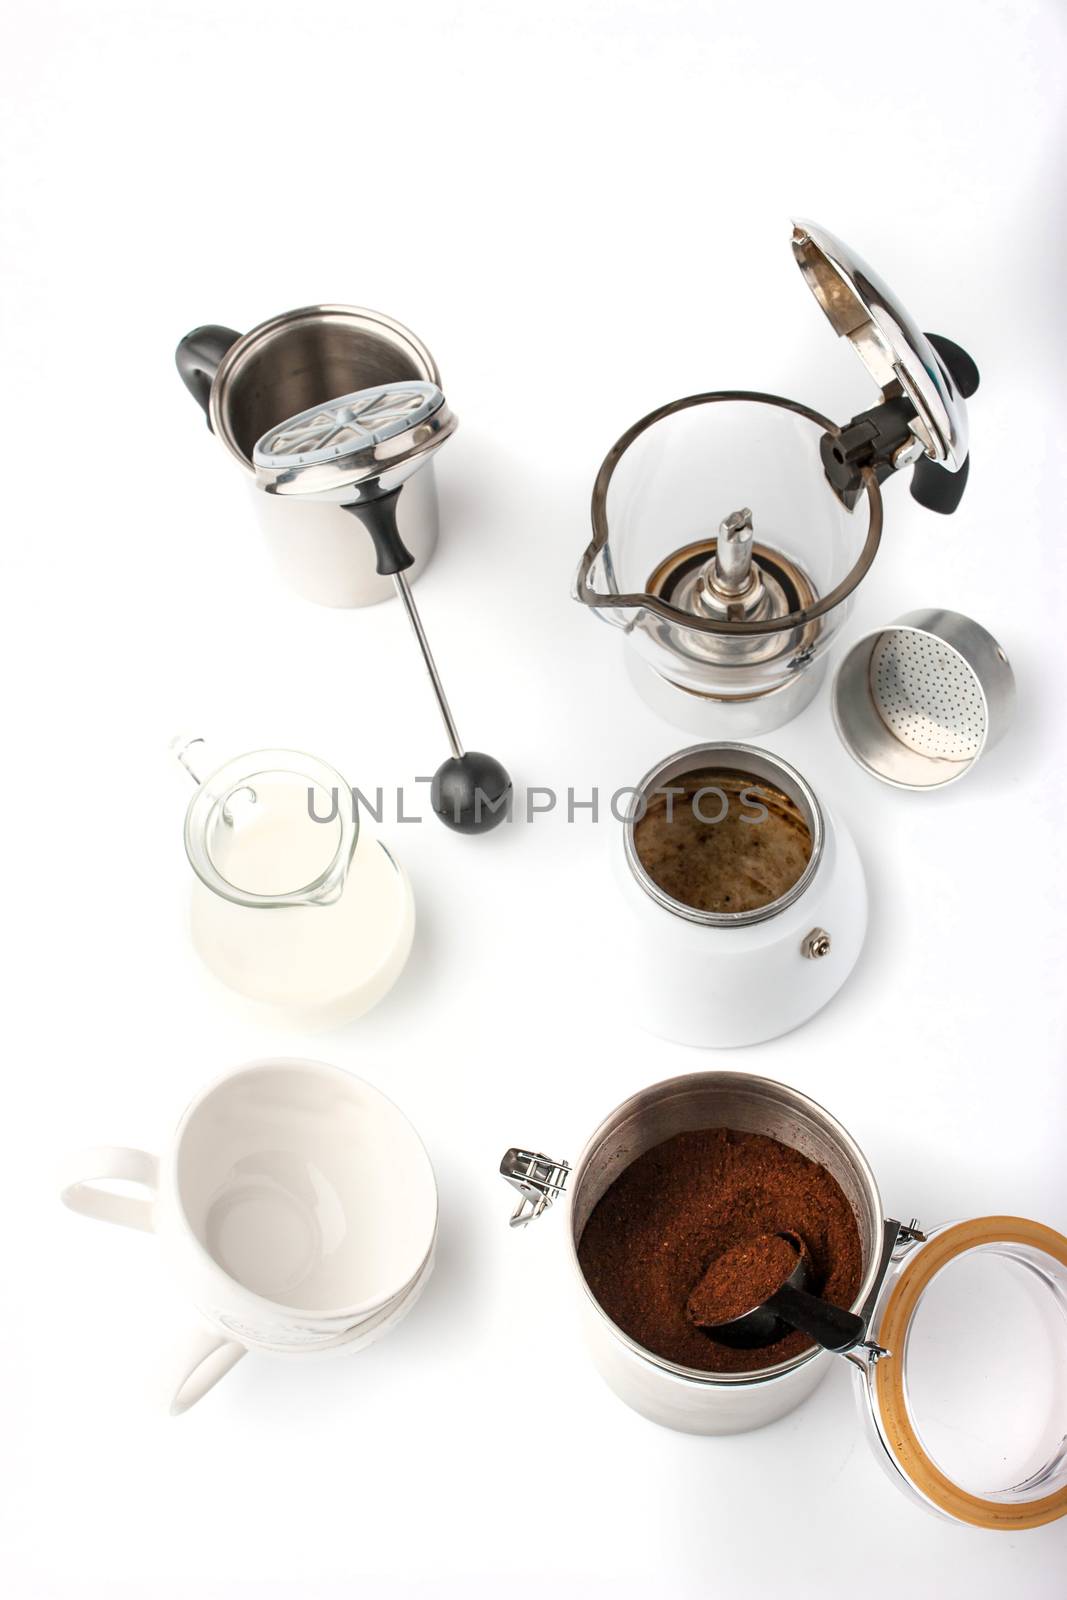 Equipment for preparation coffee  on the white background vertical